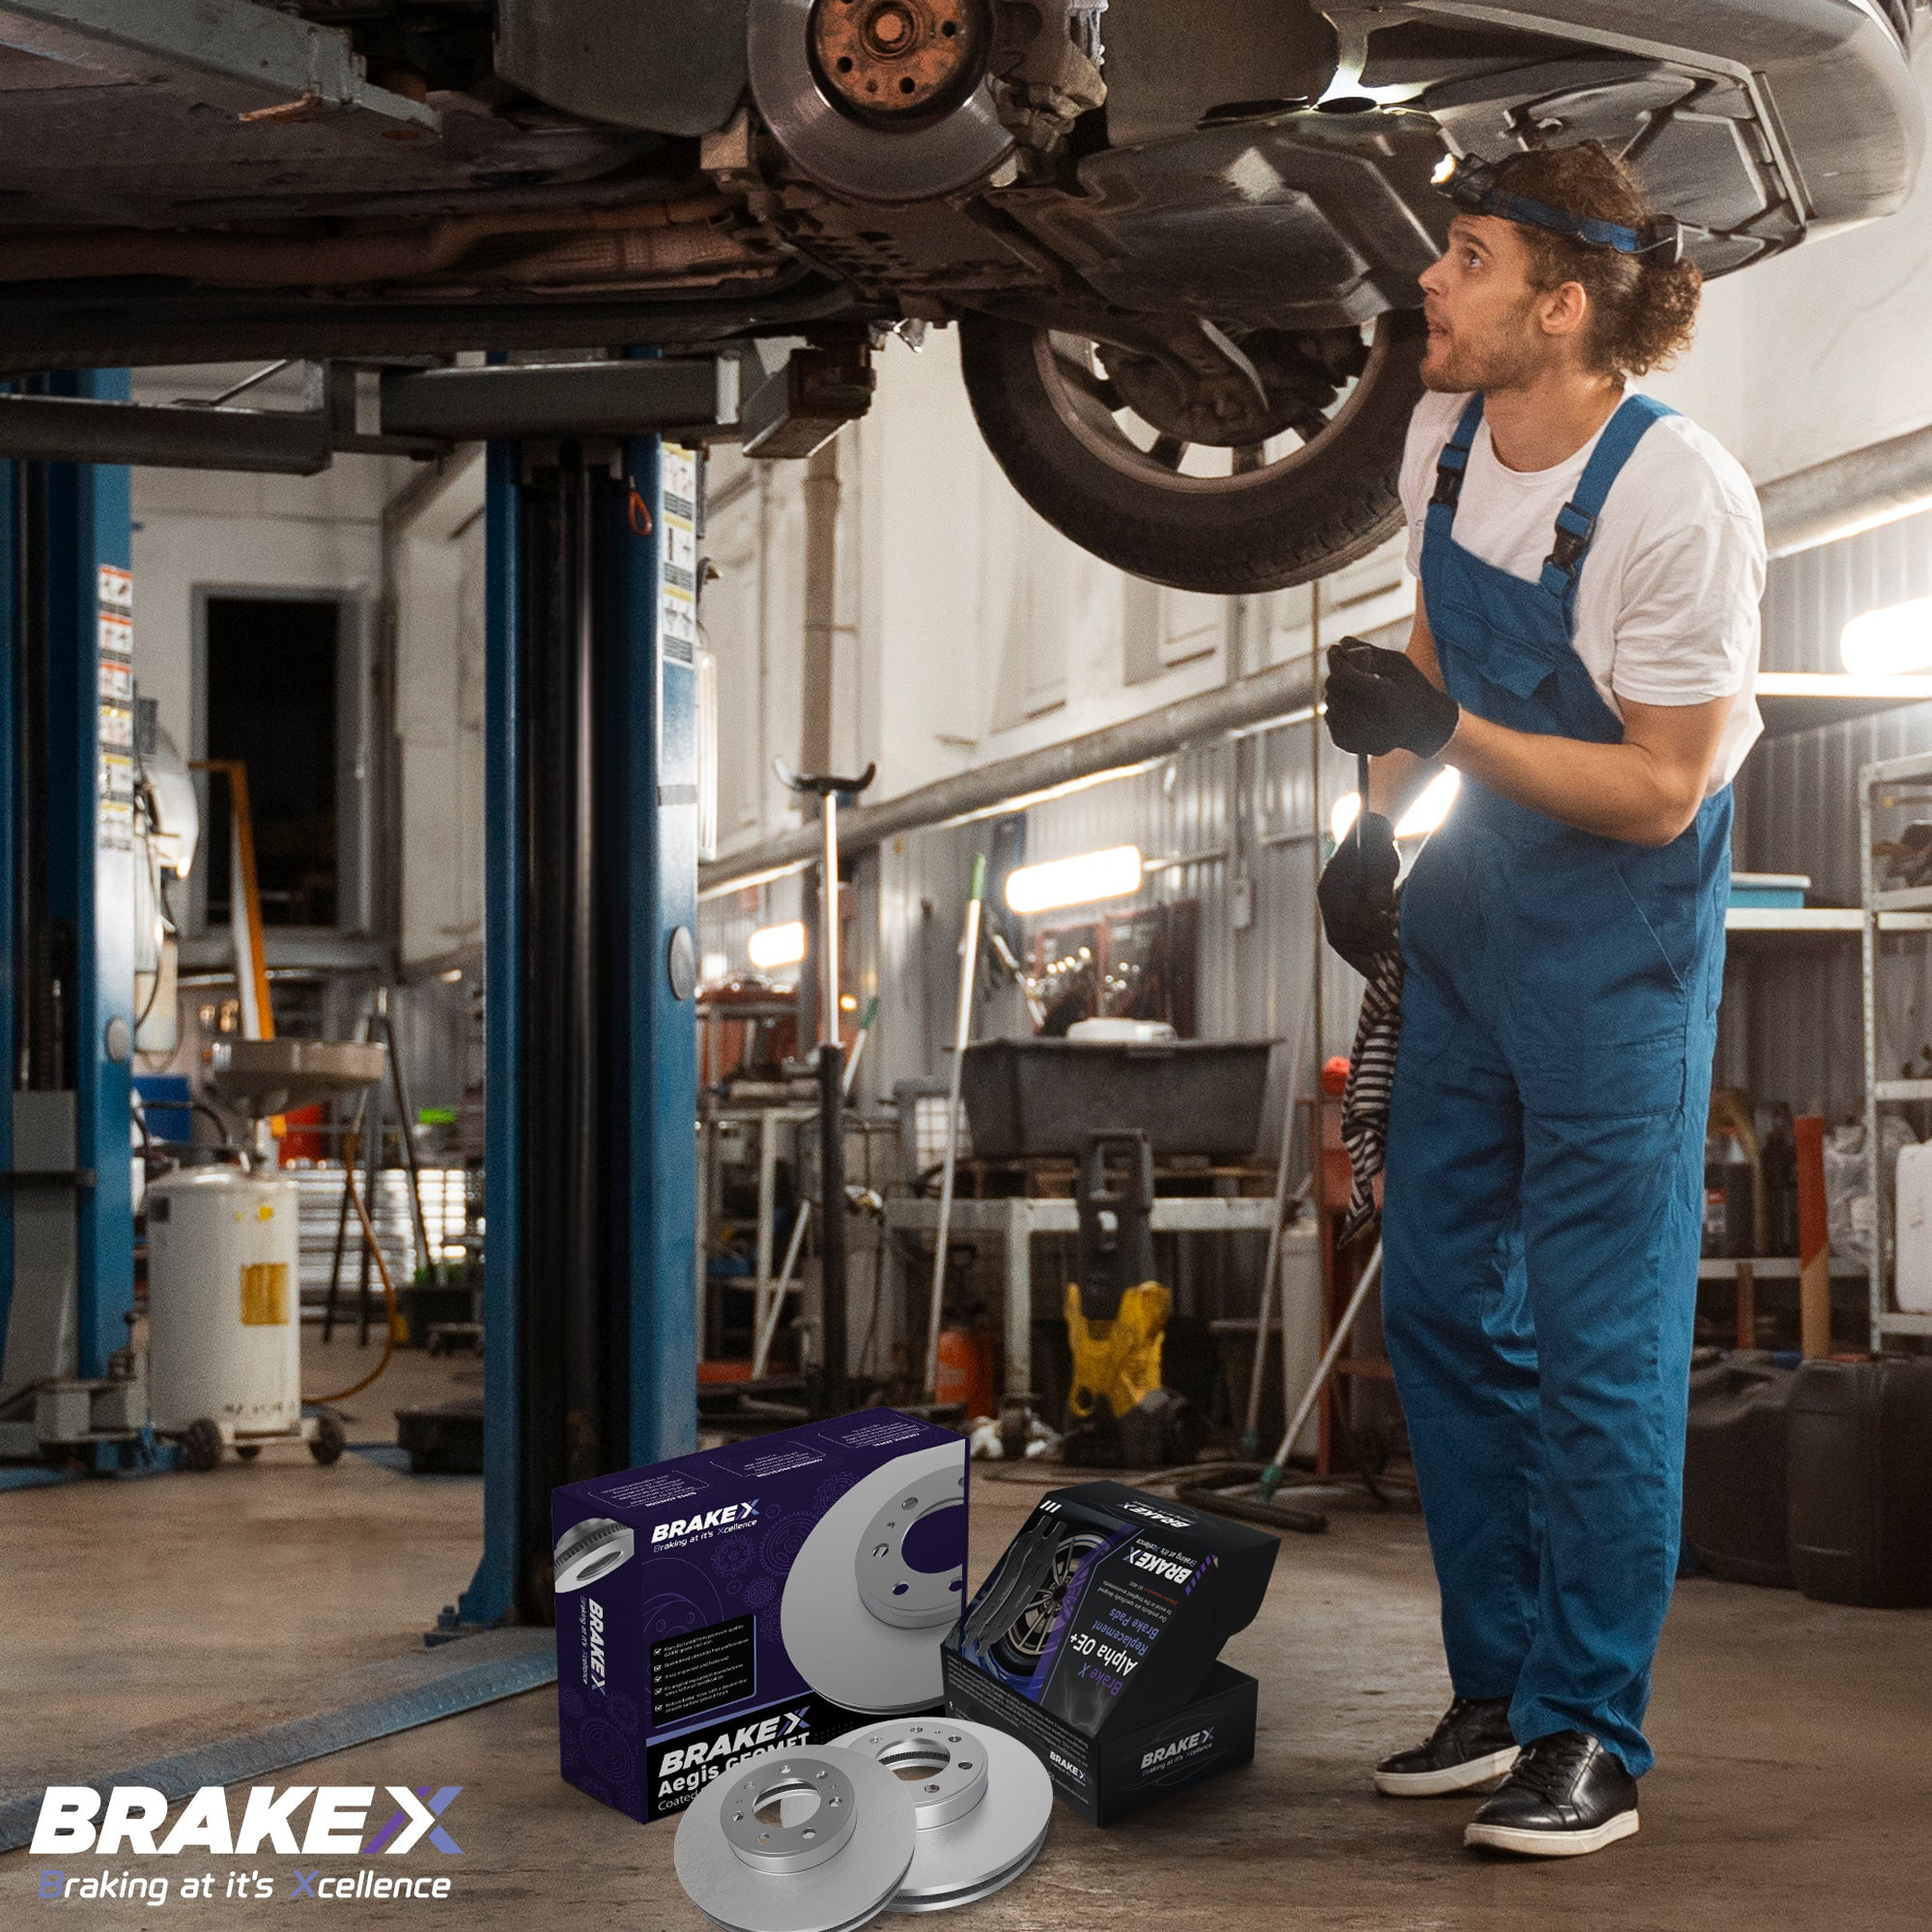 Rear] Brake X Advanced X Replacement Disc Rotors and Premium